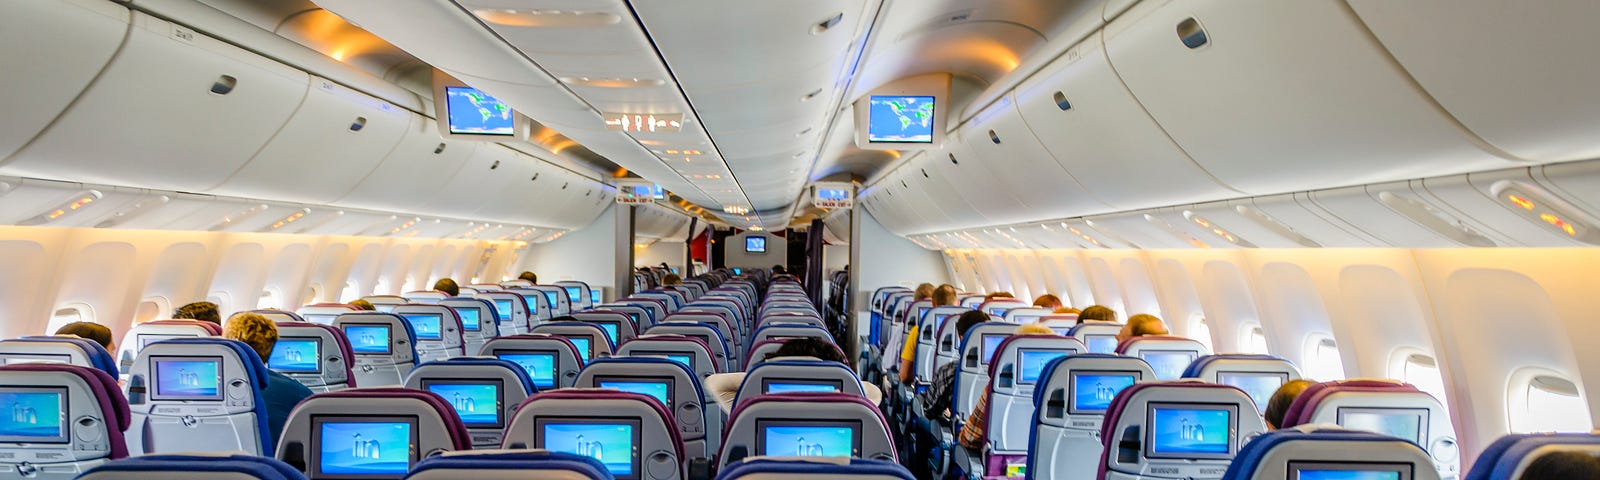 An aircraft cabin with rows of seats, some of which have people sitting in them, watching the T.V. screen on the back of the seat in front.